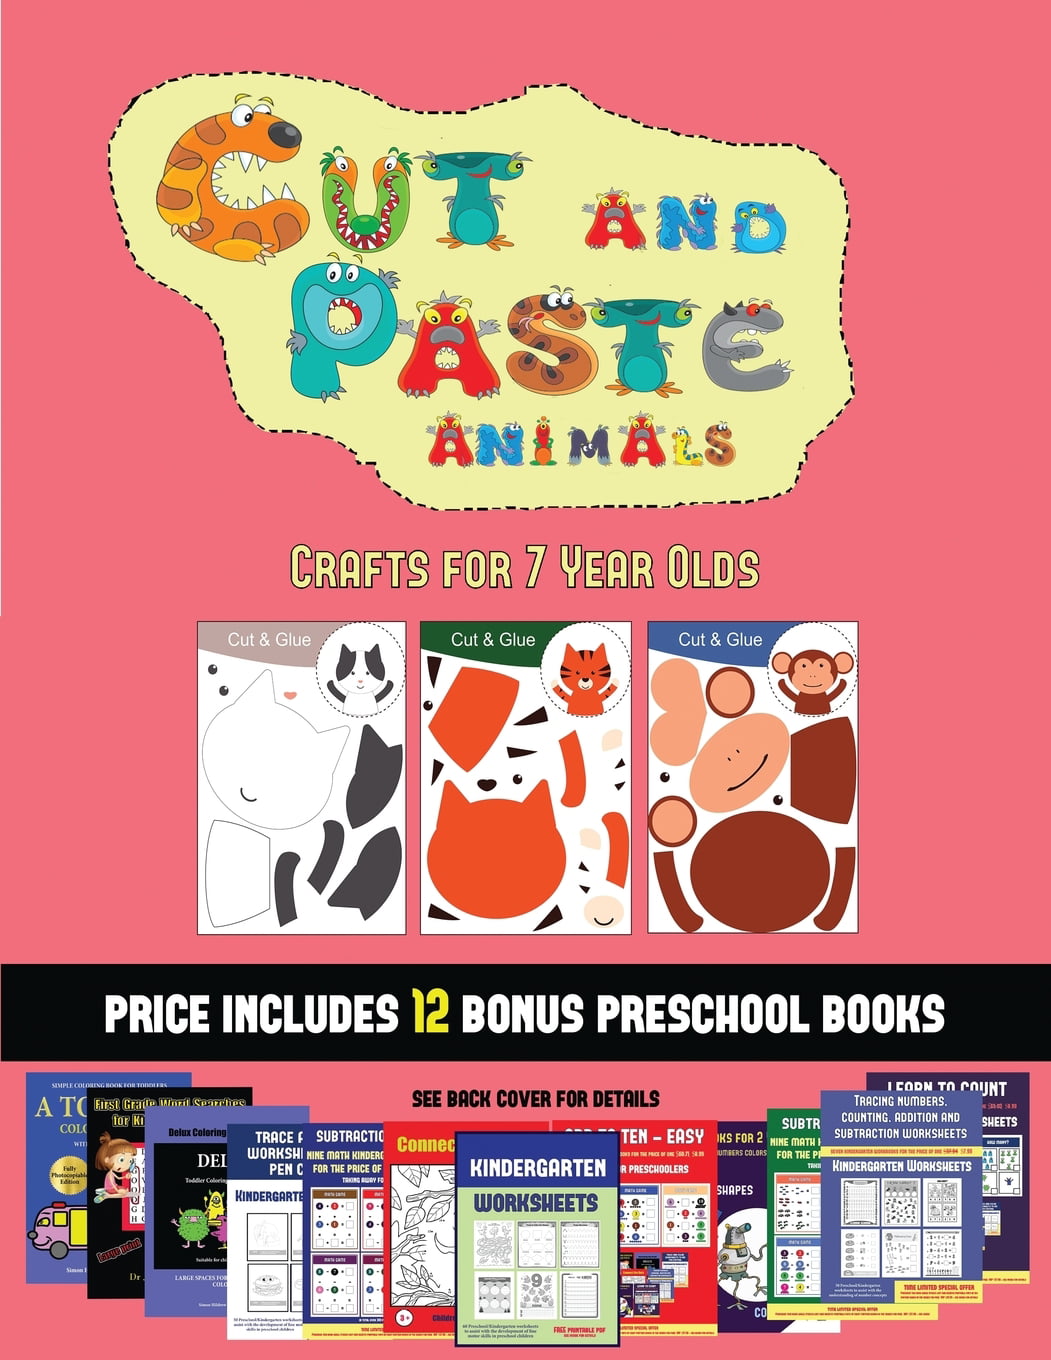 Crafts for 7 Year Olds: Crafts for 7 Year Olds (Cut and Paste Animals